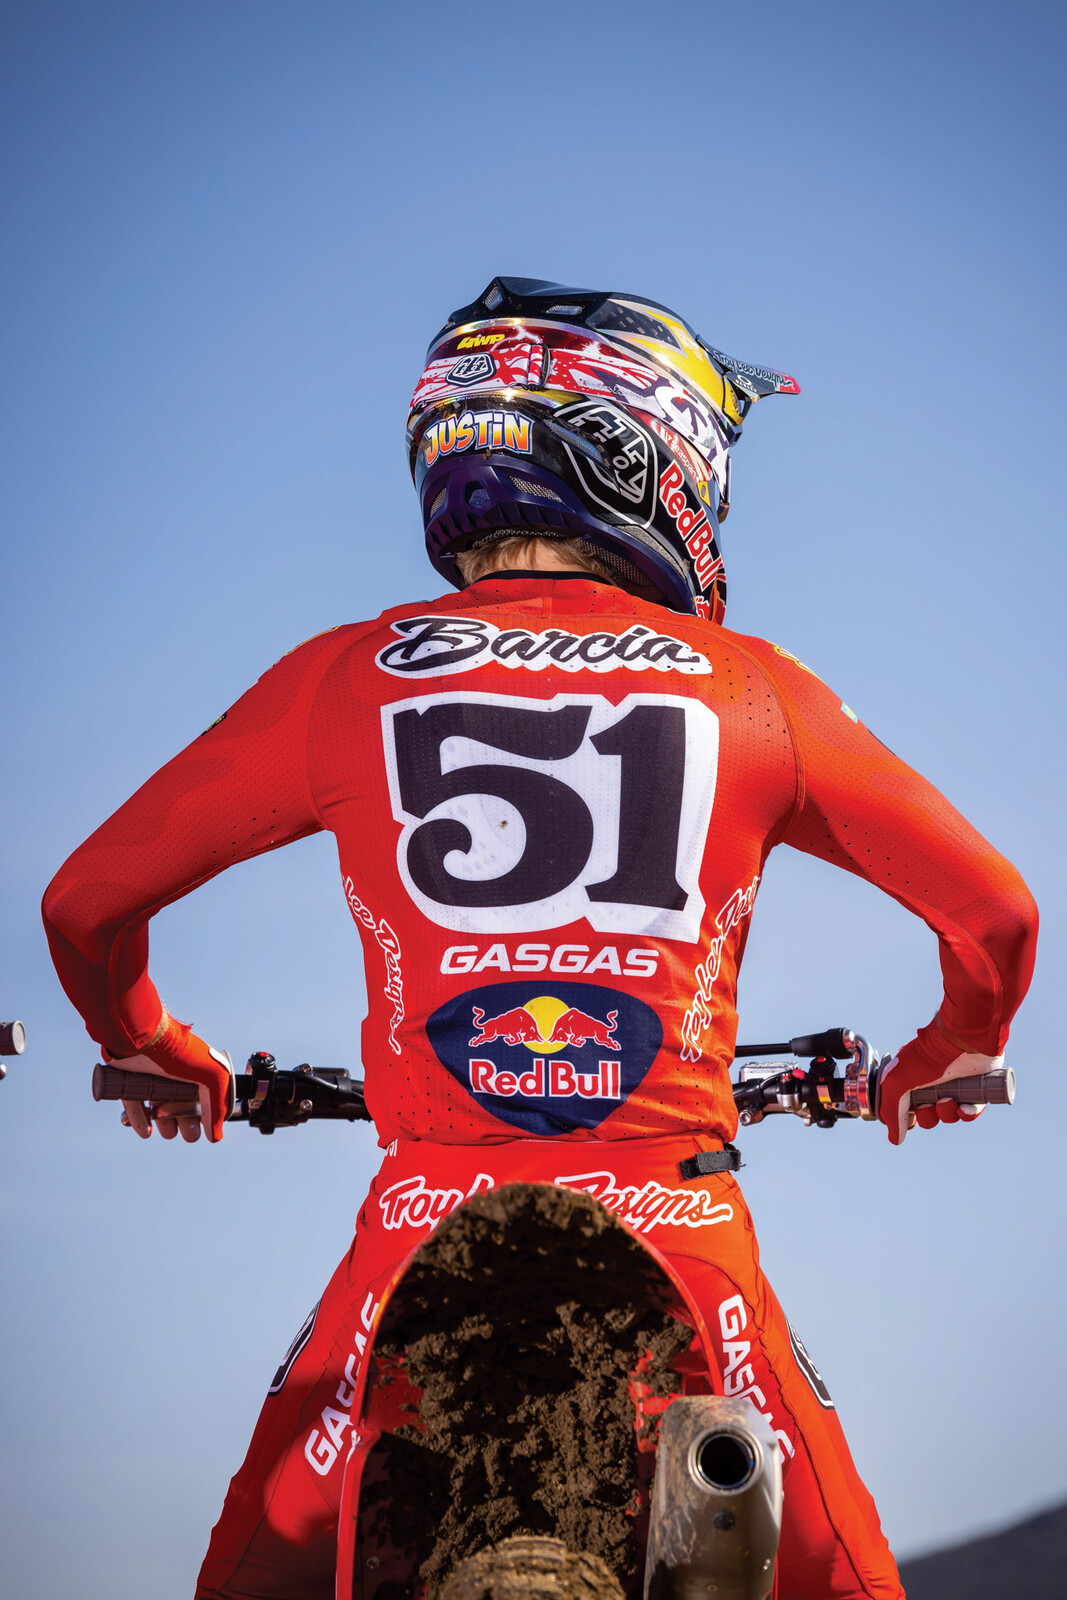 Troy Lee Designs/Red Bull/GasGas Announces 2023 Roster, Personnel